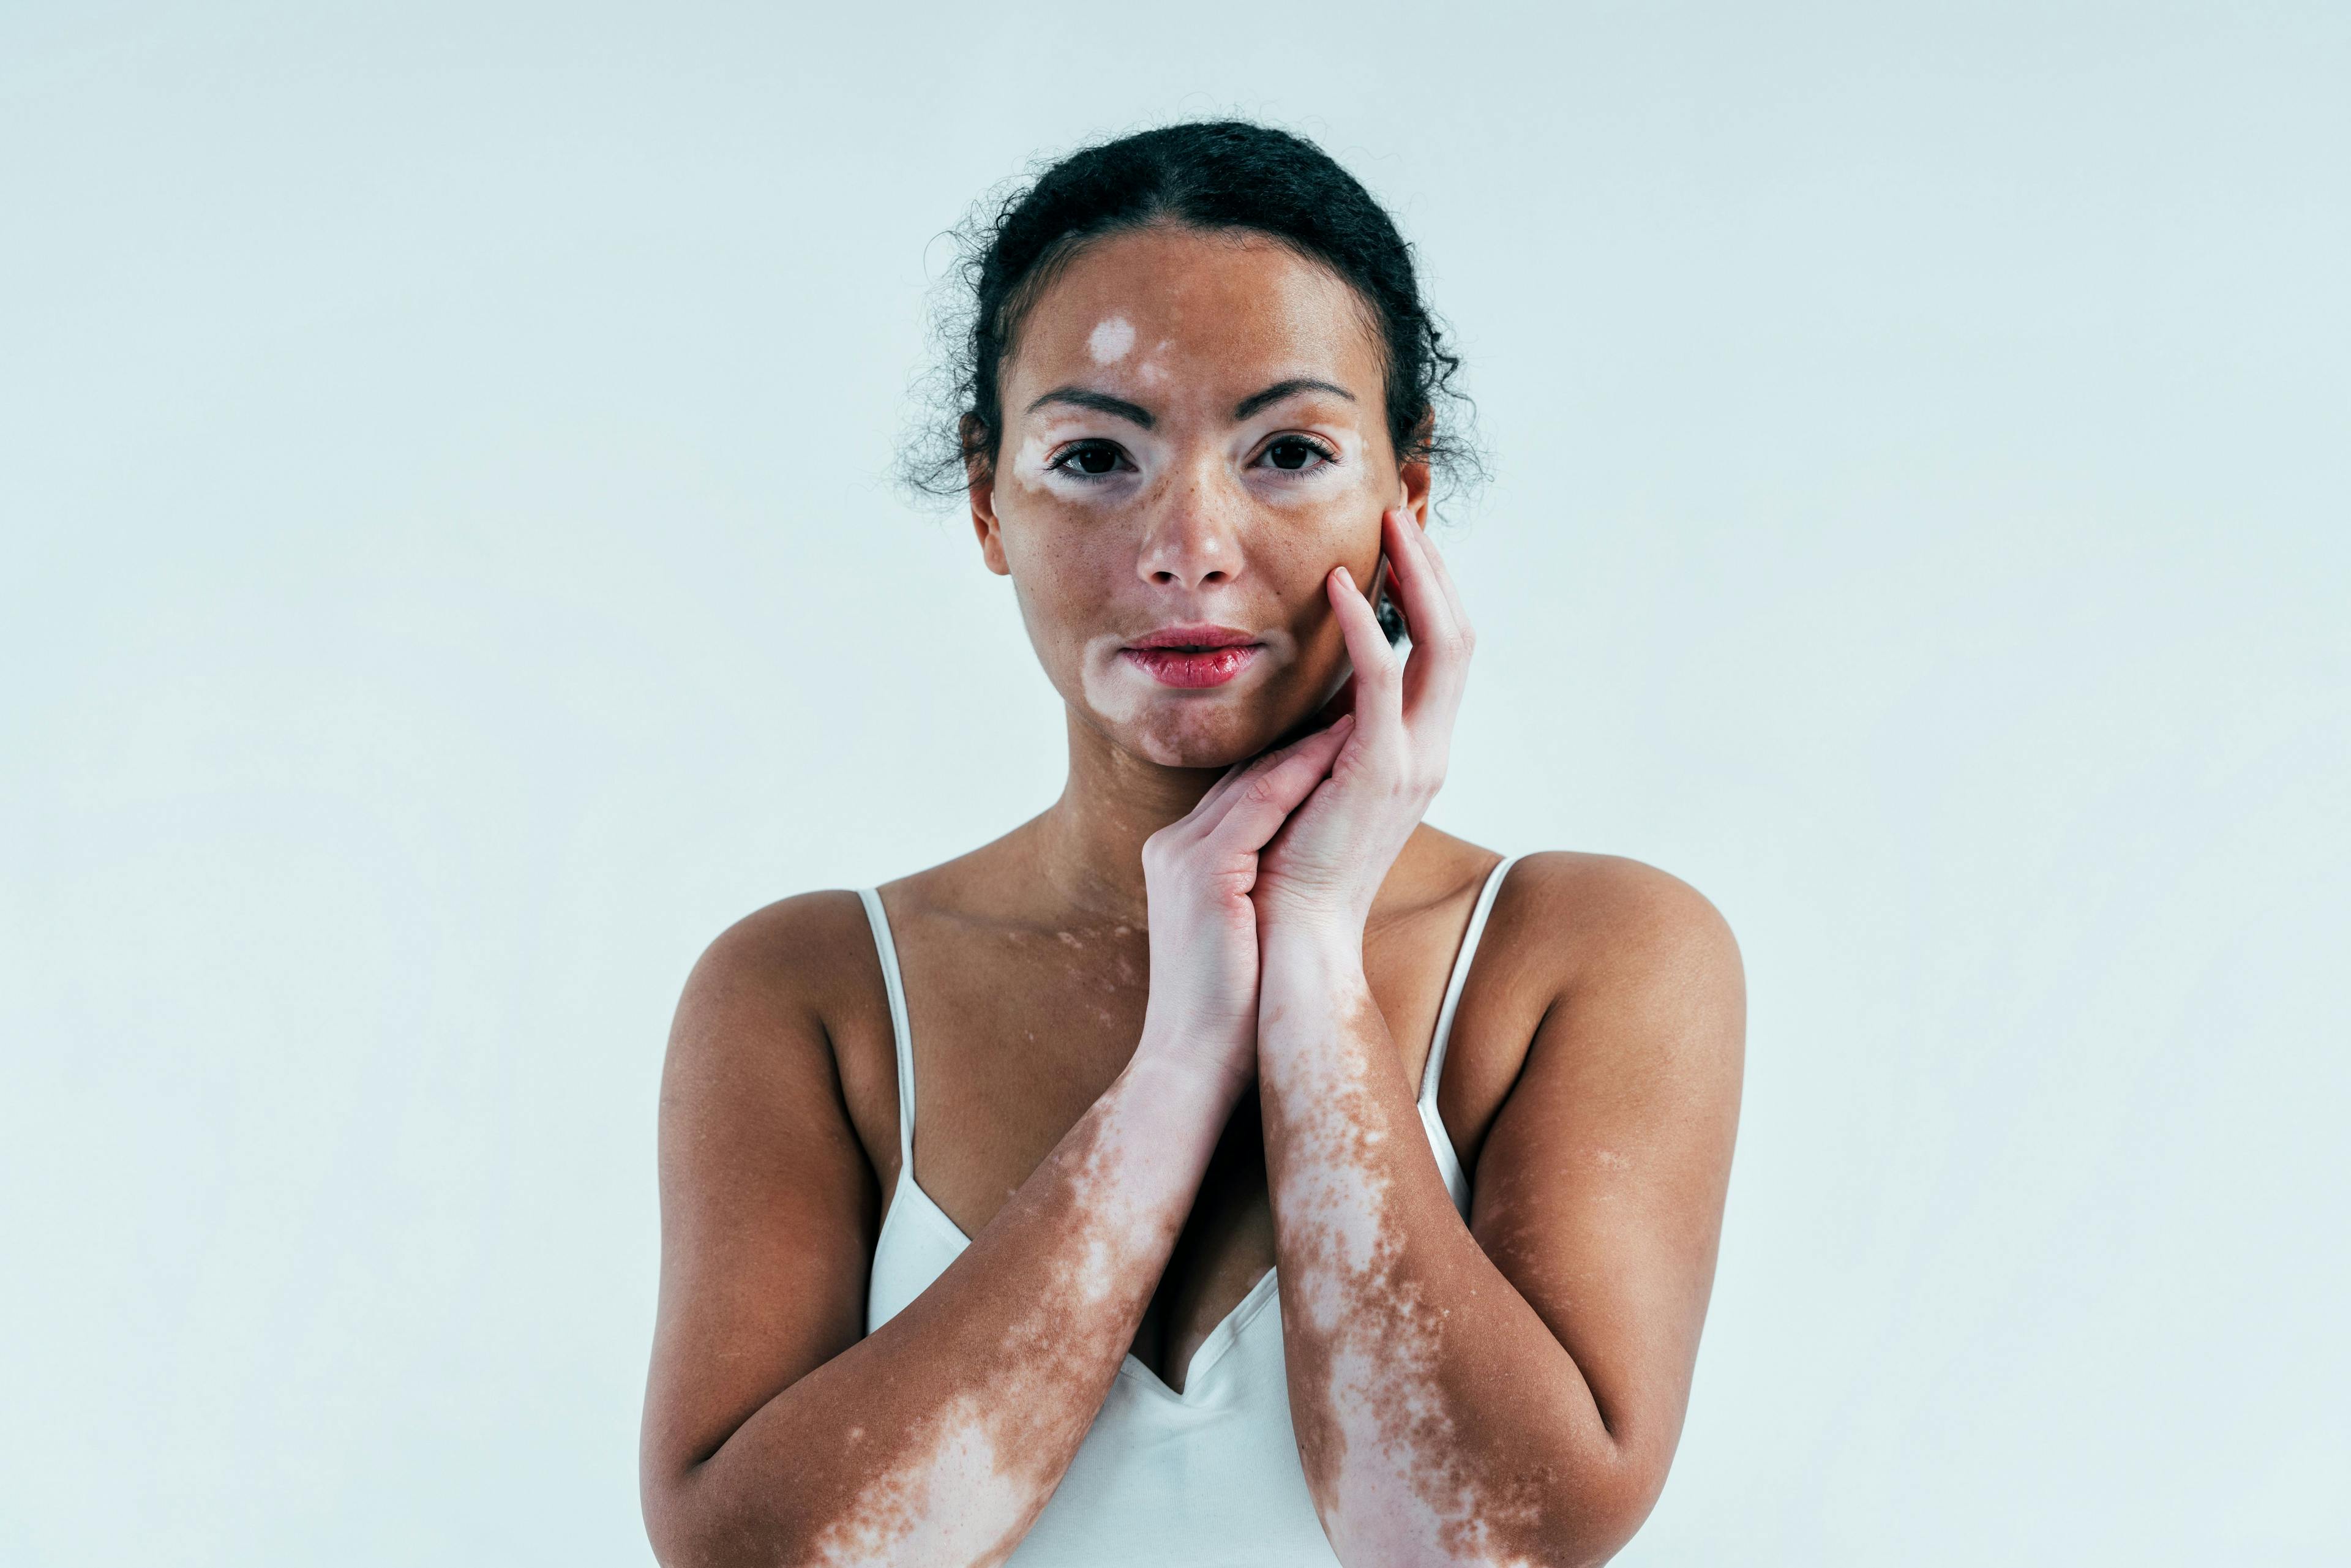 Studies Find High Prevalence of Suicidal Ideation in Patients with Vitiligo